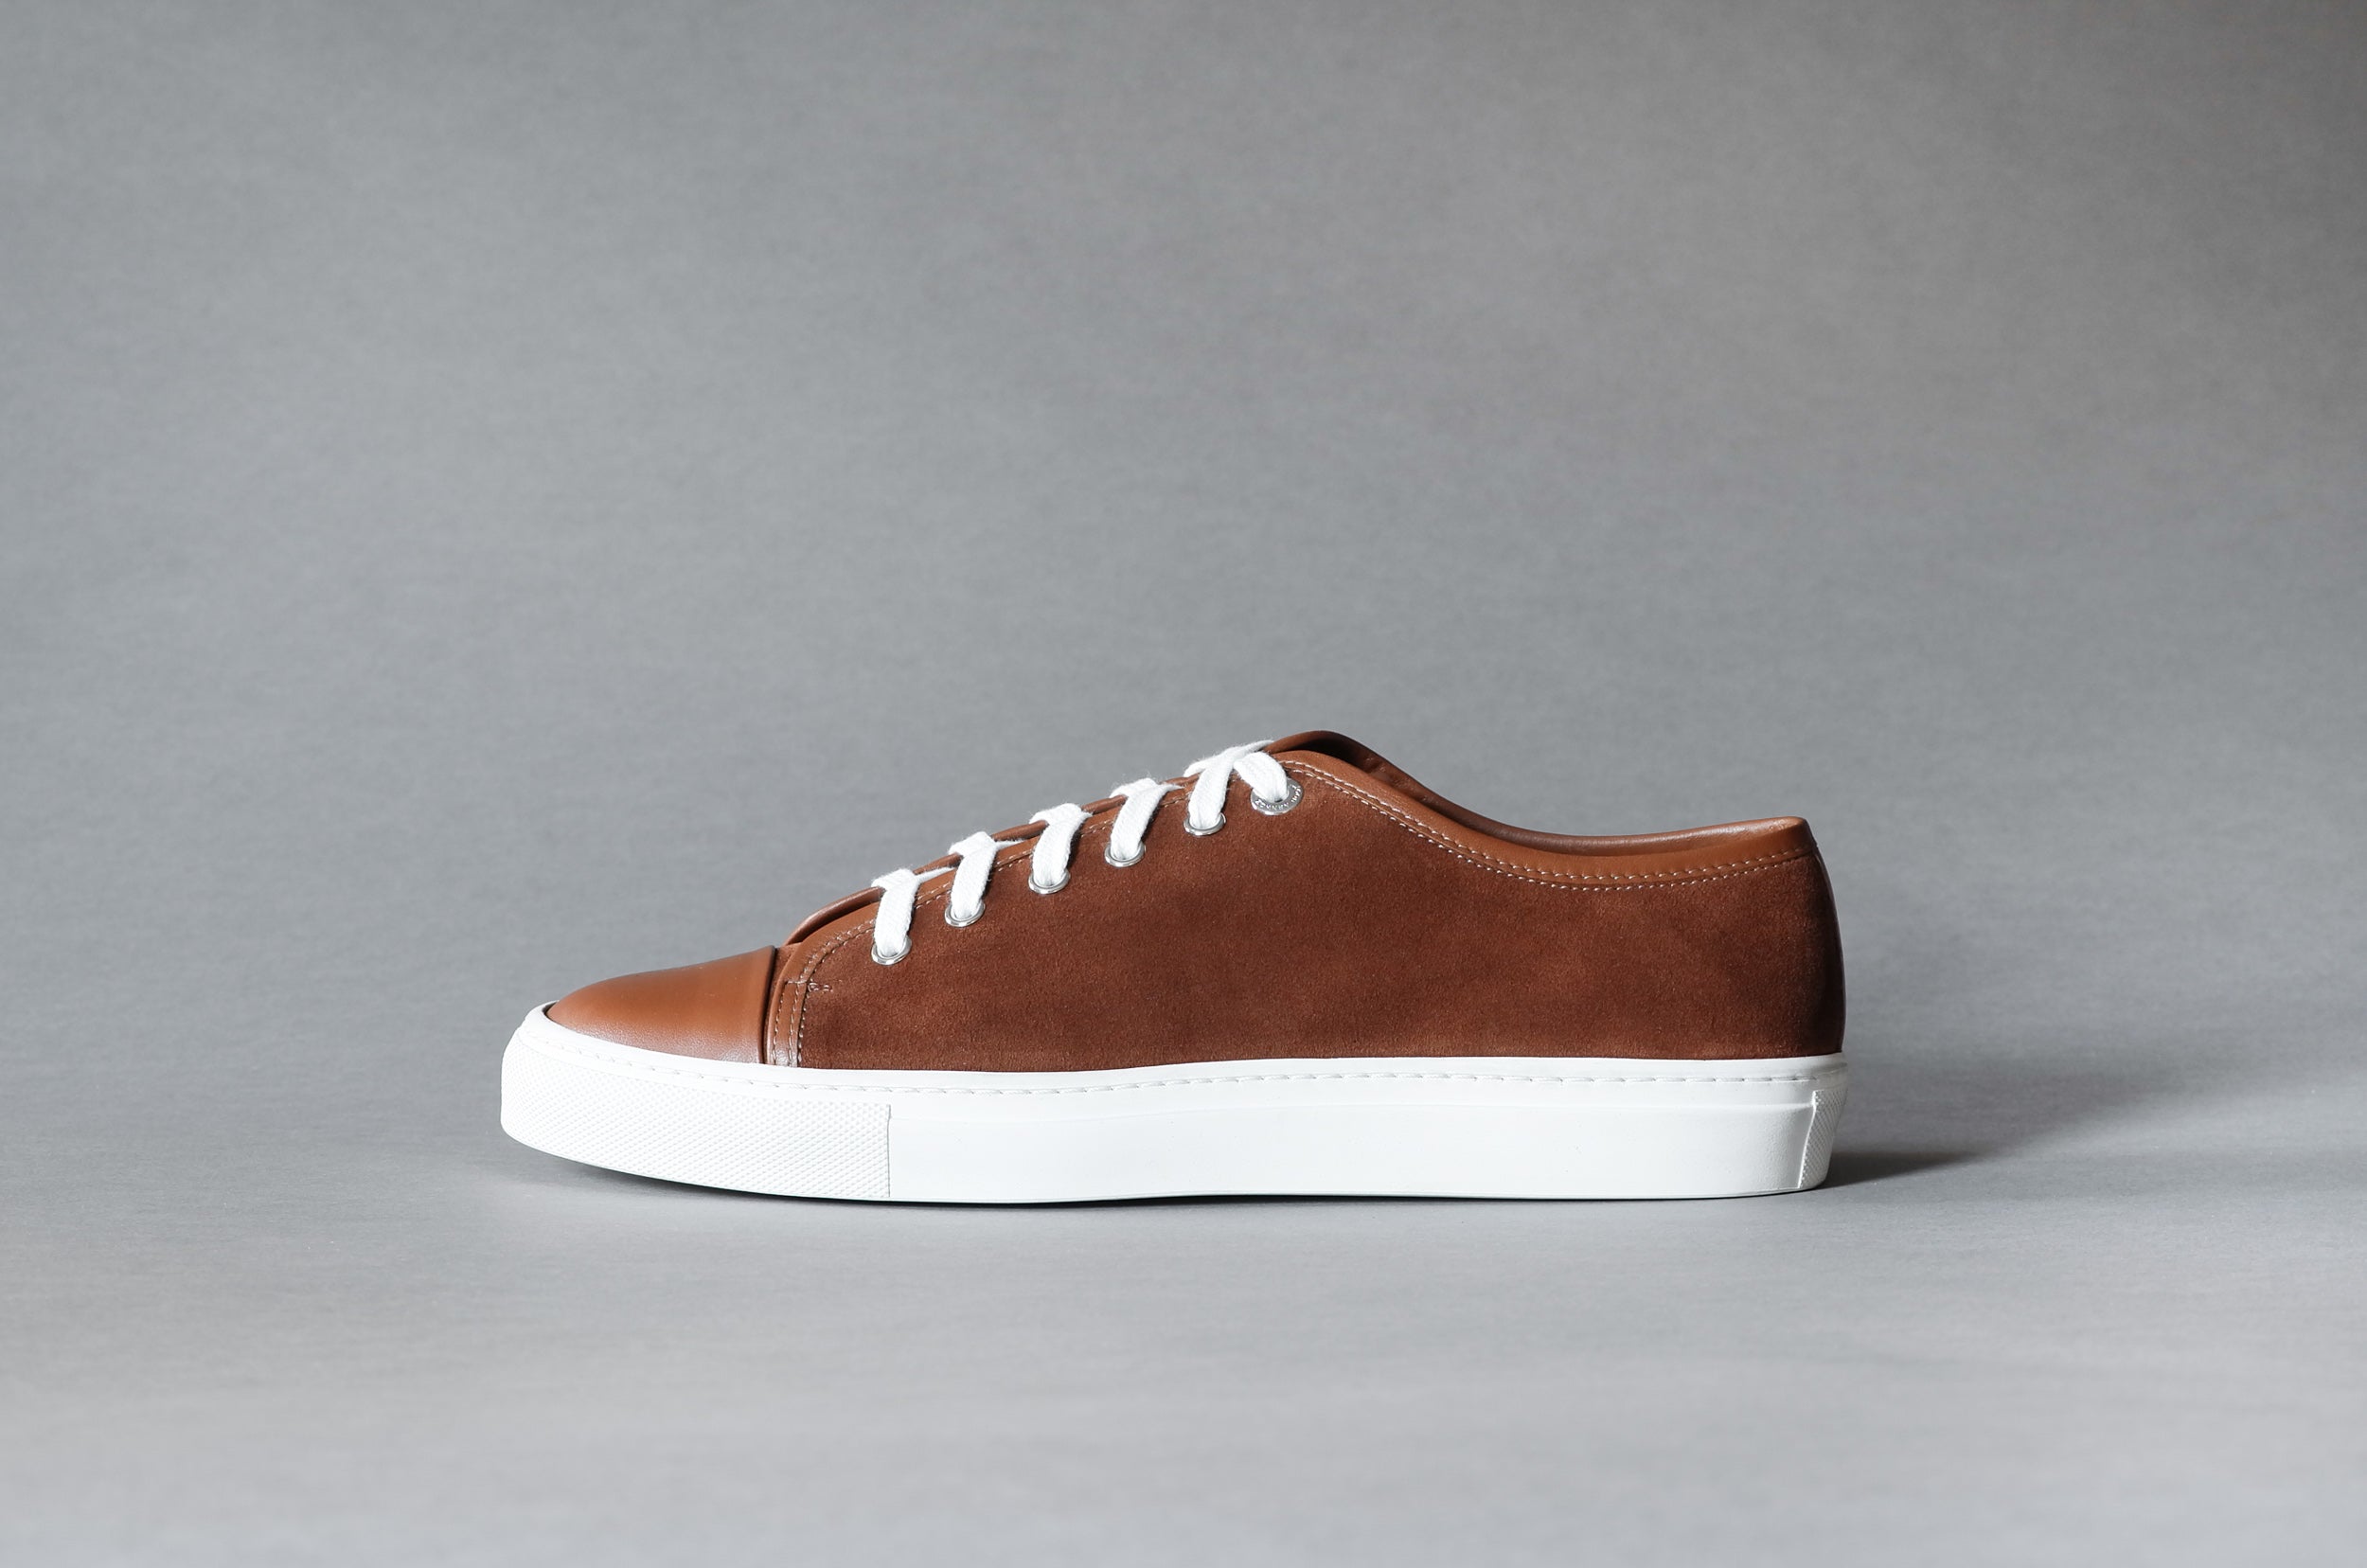 Zonkey Boot sneakers from mid-brown calf leather and suede